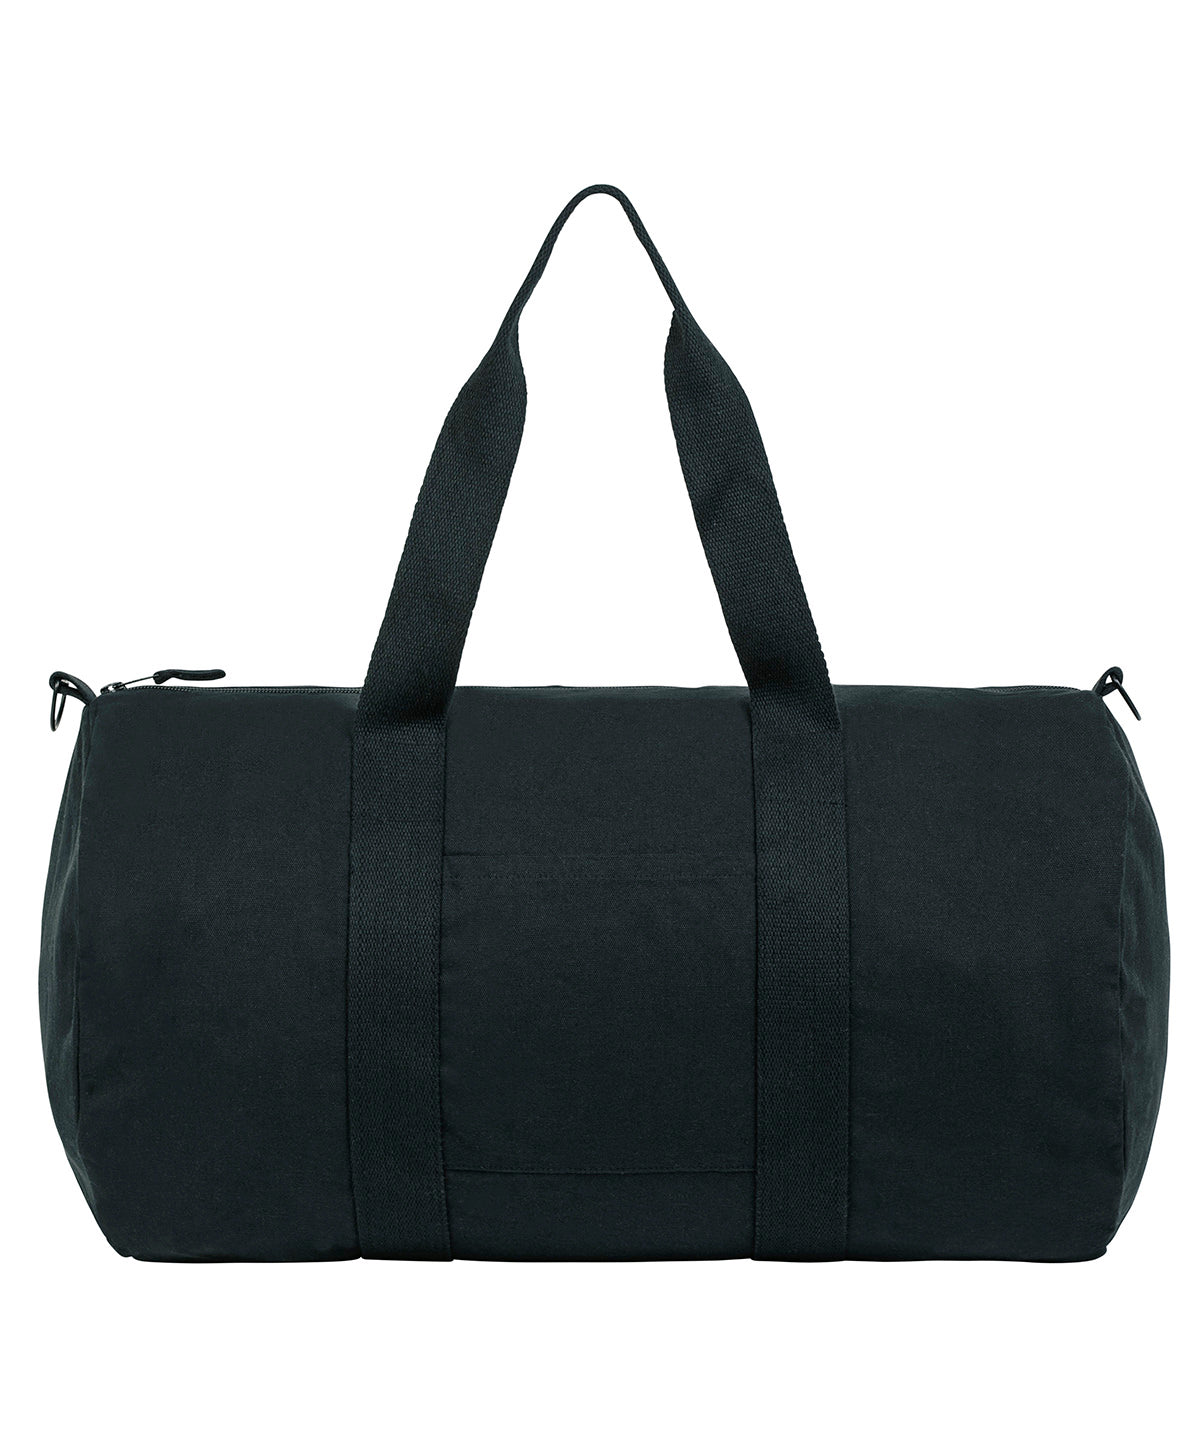 Organic Canvas Duffle Bag with shoulder strap